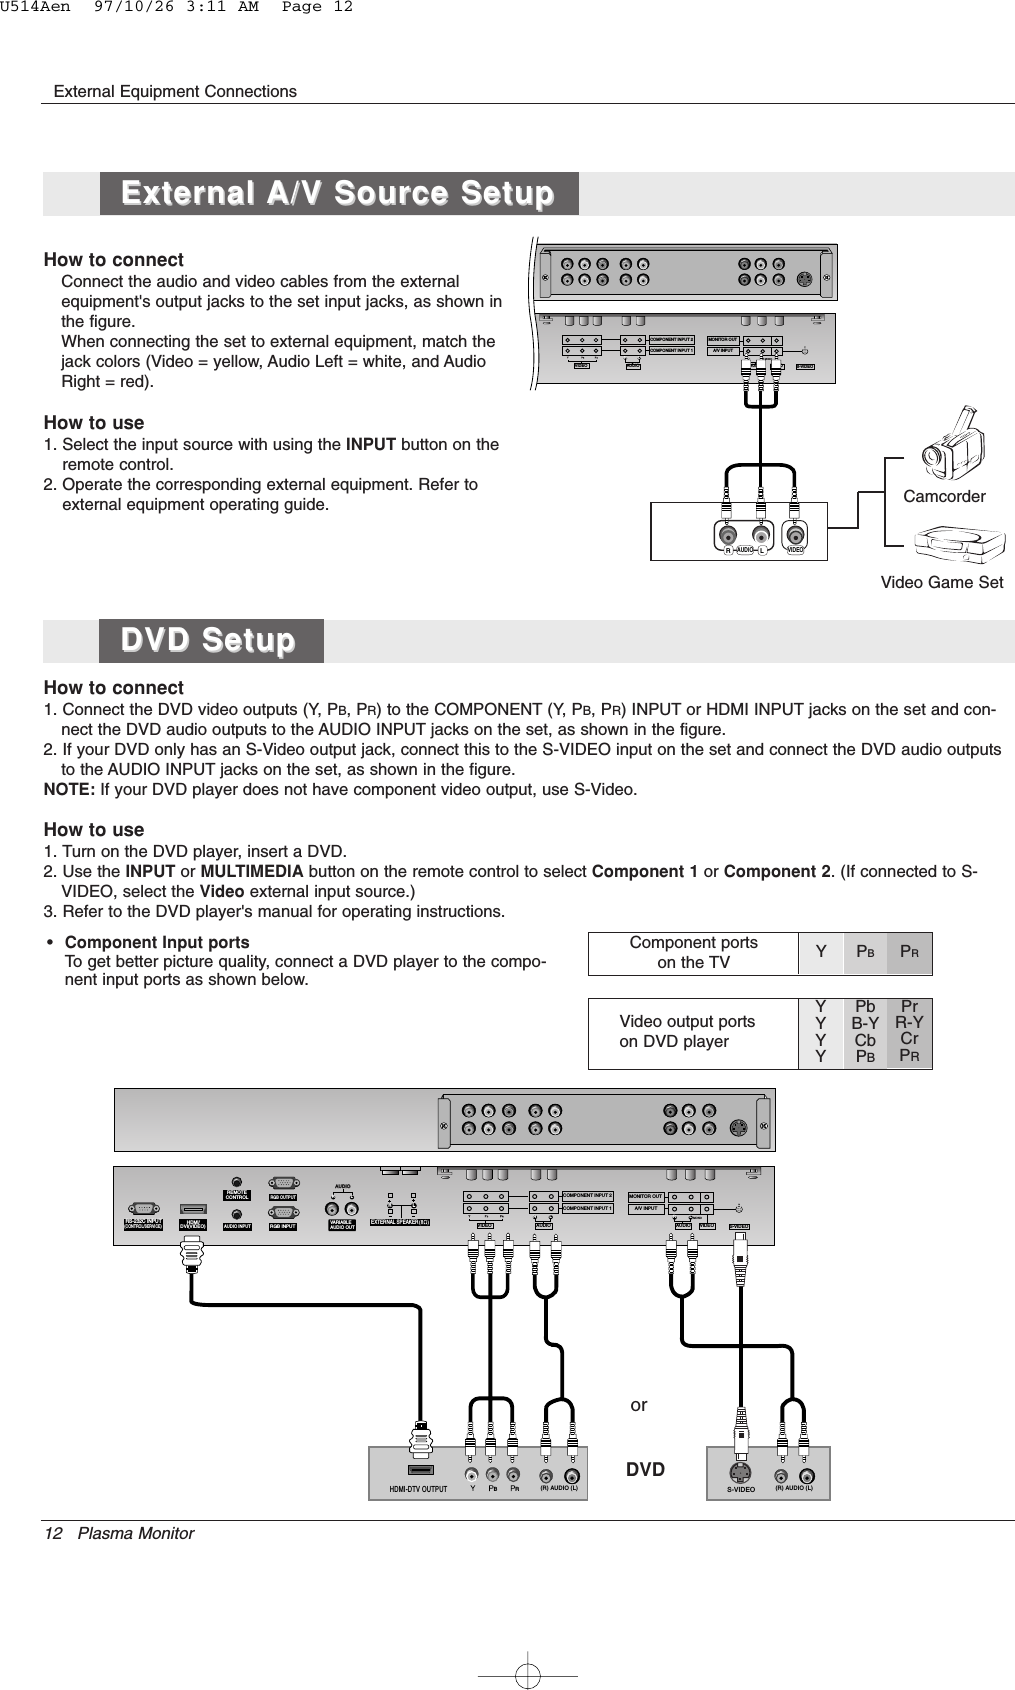 12 Plasma MonitorExternal Equipment Connections•Component Input portsTo get better picture quality, connect a DVD player to the compo-nent input ports as shown below.How to connectConnect the audio and video cables from the externalequipment&apos;s output jacks to the set input jacks, as shown inthe figure. When connecting the set to external equipment, match thejack colors (Video = yellow, Audio Left = white, and AudioRight = red).How to use1. Select the input source with using the INPUT button on theremote control.2. Operate the corresponding external equipment. Refer toexternal equipment operating guide.Component ports on the TV Y PBPRVideo output ports on DVD playerYYYYPbB-YCbPBPrR-YCrPRHow to connect1. Connect the DVD video outputs (Y, PB, PR) to the COMPONENT (Y, PB, PR) INPUT or HDMI INPUT jacks on the set and con-nect the DVD audio outputs to the AUDIO INPUT jacks on the set, as shown in the figure.2. If your DVD only has an S-Video output jack, connect this to the S-VIDEO input on the set and connect the DVD audio outputsto the AUDIO INPUT jacks on the set, as shown in the figure.NOTE: If your DVD player does not have component video output, use S-Video.How to use1. Turn on the DVD player, insert a DVD.2. Use the INPUT or MULTIMEDIA button on the remote control to select Component 1 or Component 2. (If connected to S-VIDEO, select the Video external input source.)3. Refer to the DVD player&apos;s manual for operating instructions.AUDIO VARIABLE AUDIO OUTS-VIDEOCOMPONENT INPUT 2COMPONENT INPUT 1AUDIOVIDEORLAUDIO VIDEORMONITOR OUTA/V INPUTLMONORLAUDIO VIDEORS-232C INPUT(CONTROL/SERVICE)AUDIO AUDIO LR REMOTECONTROLAUDIO INPUTRGB INPUT     HDMI/DVI(VIDEO)RGB OUTPUTS-VIDEOCOMPONENT INPUT 2COMPONENT INPUT 1AUDIOVIDEORLAUDIO VIDEORMONITOR OUTA/V INPUTLMONOVARIABLEAUDIO OUT    EXTERNAL SPEAKERRLBR(R) AUDIO (L) (R) AUDIO (L)S-VIDEOHDMI-DTV OUTPUTDVDorCamcorderVideo Game SetExternal External A/V Source SetupA/V Source SetupDVD SetupDVD SetupU514Aen  97/10/26 3:11 AM  Page 12